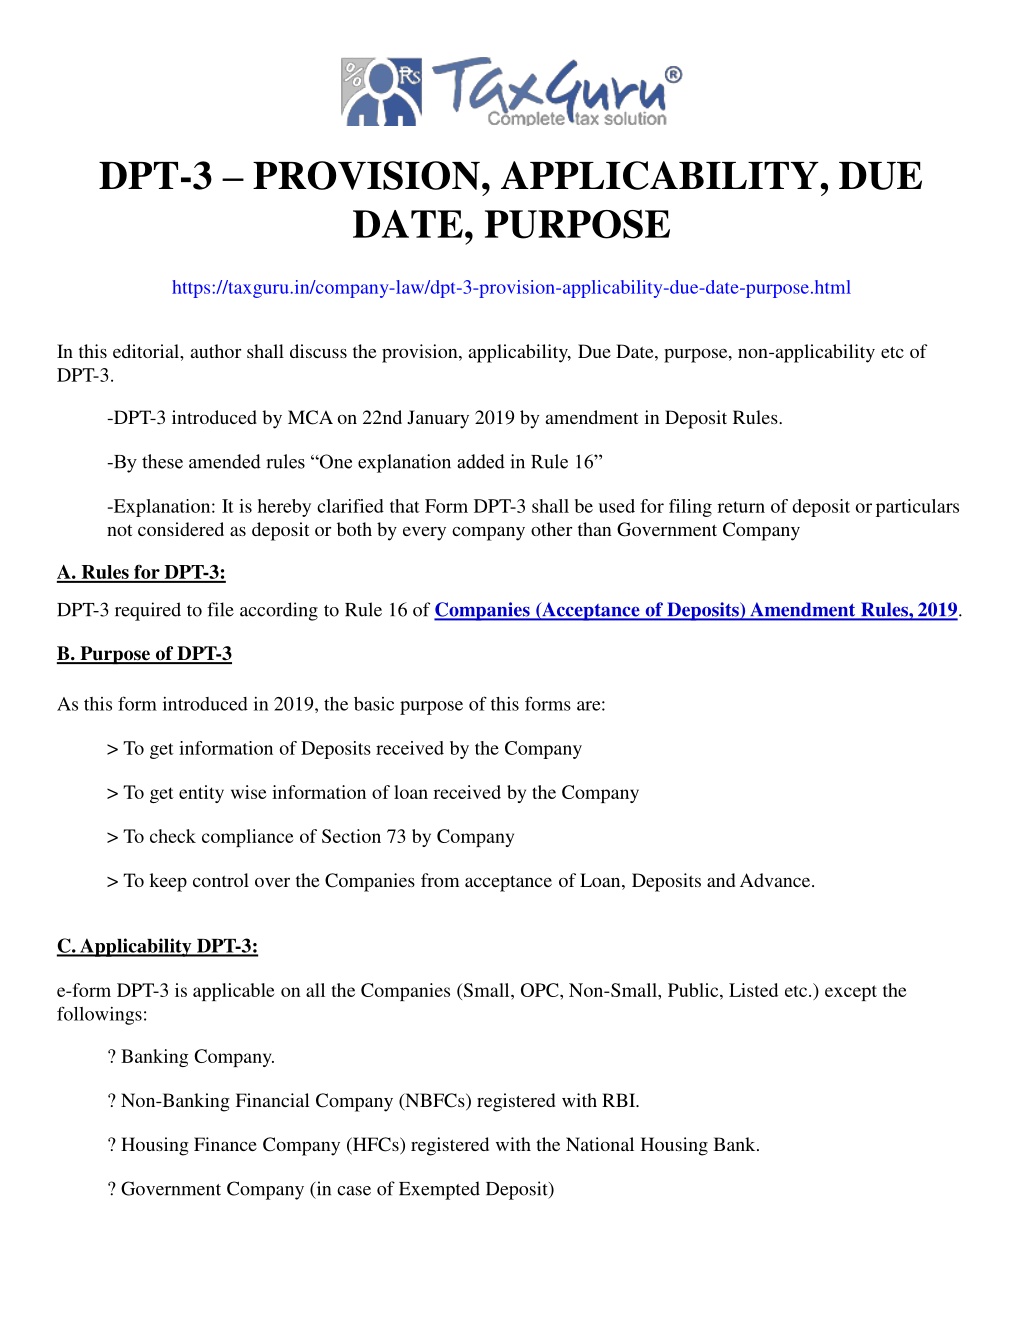 PPT DPT3 Provision, applicability, Due Date, Purpose PowerPoint